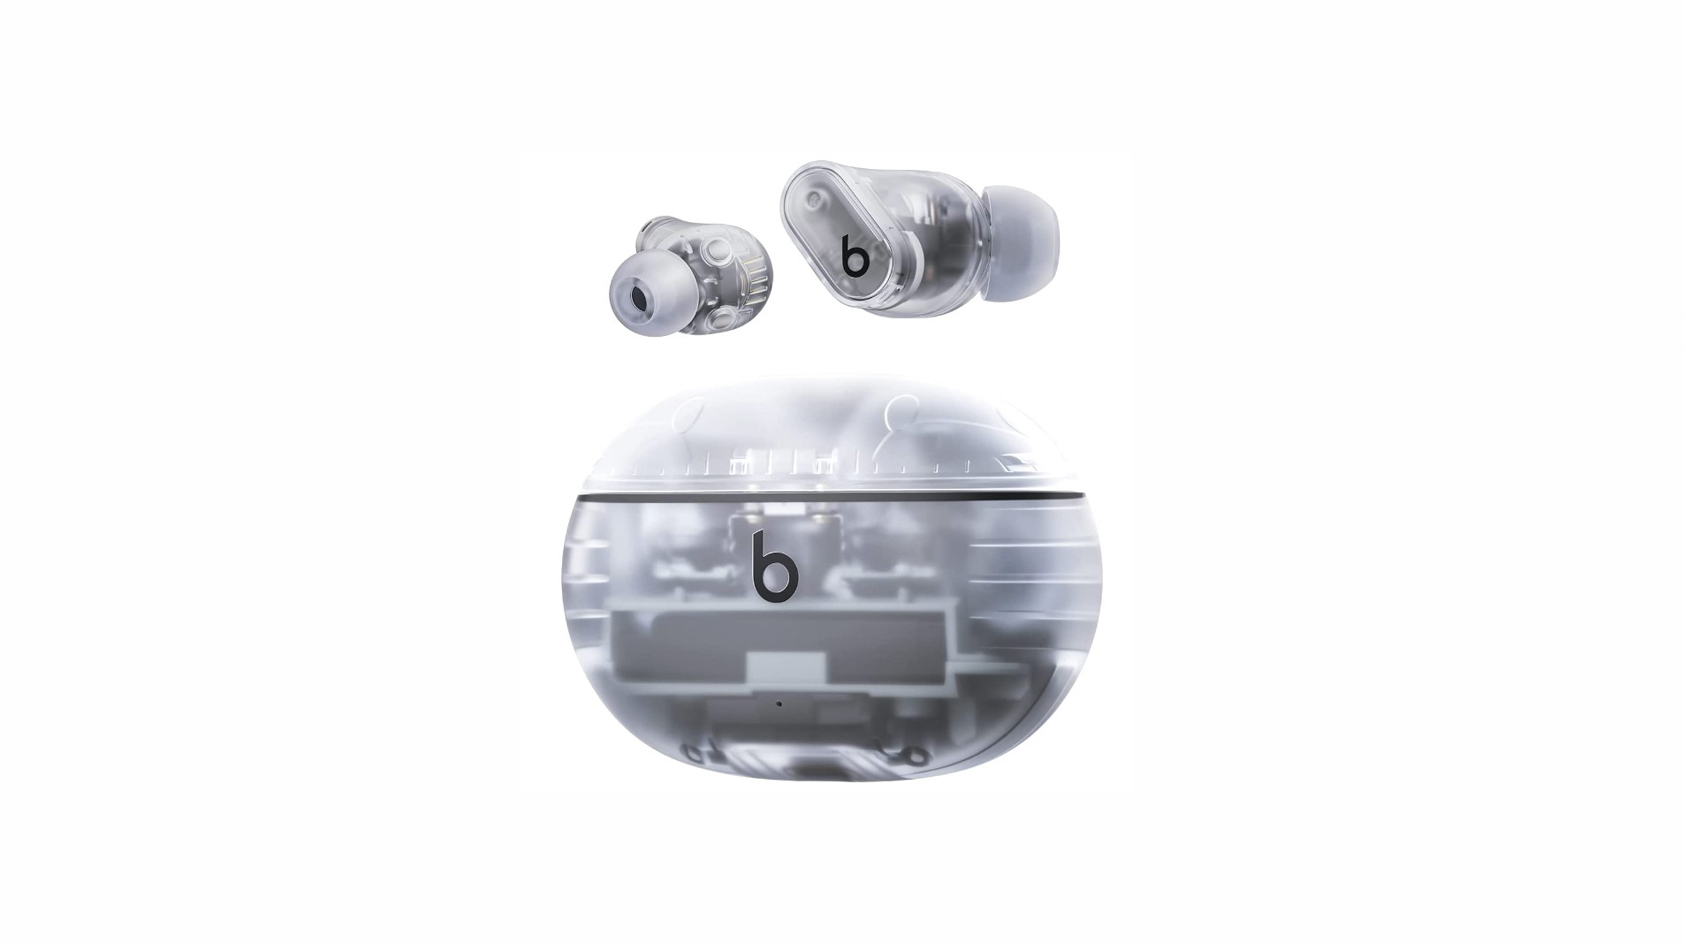 Image of Beats Studio Buds Plus earbuds and case on a white background